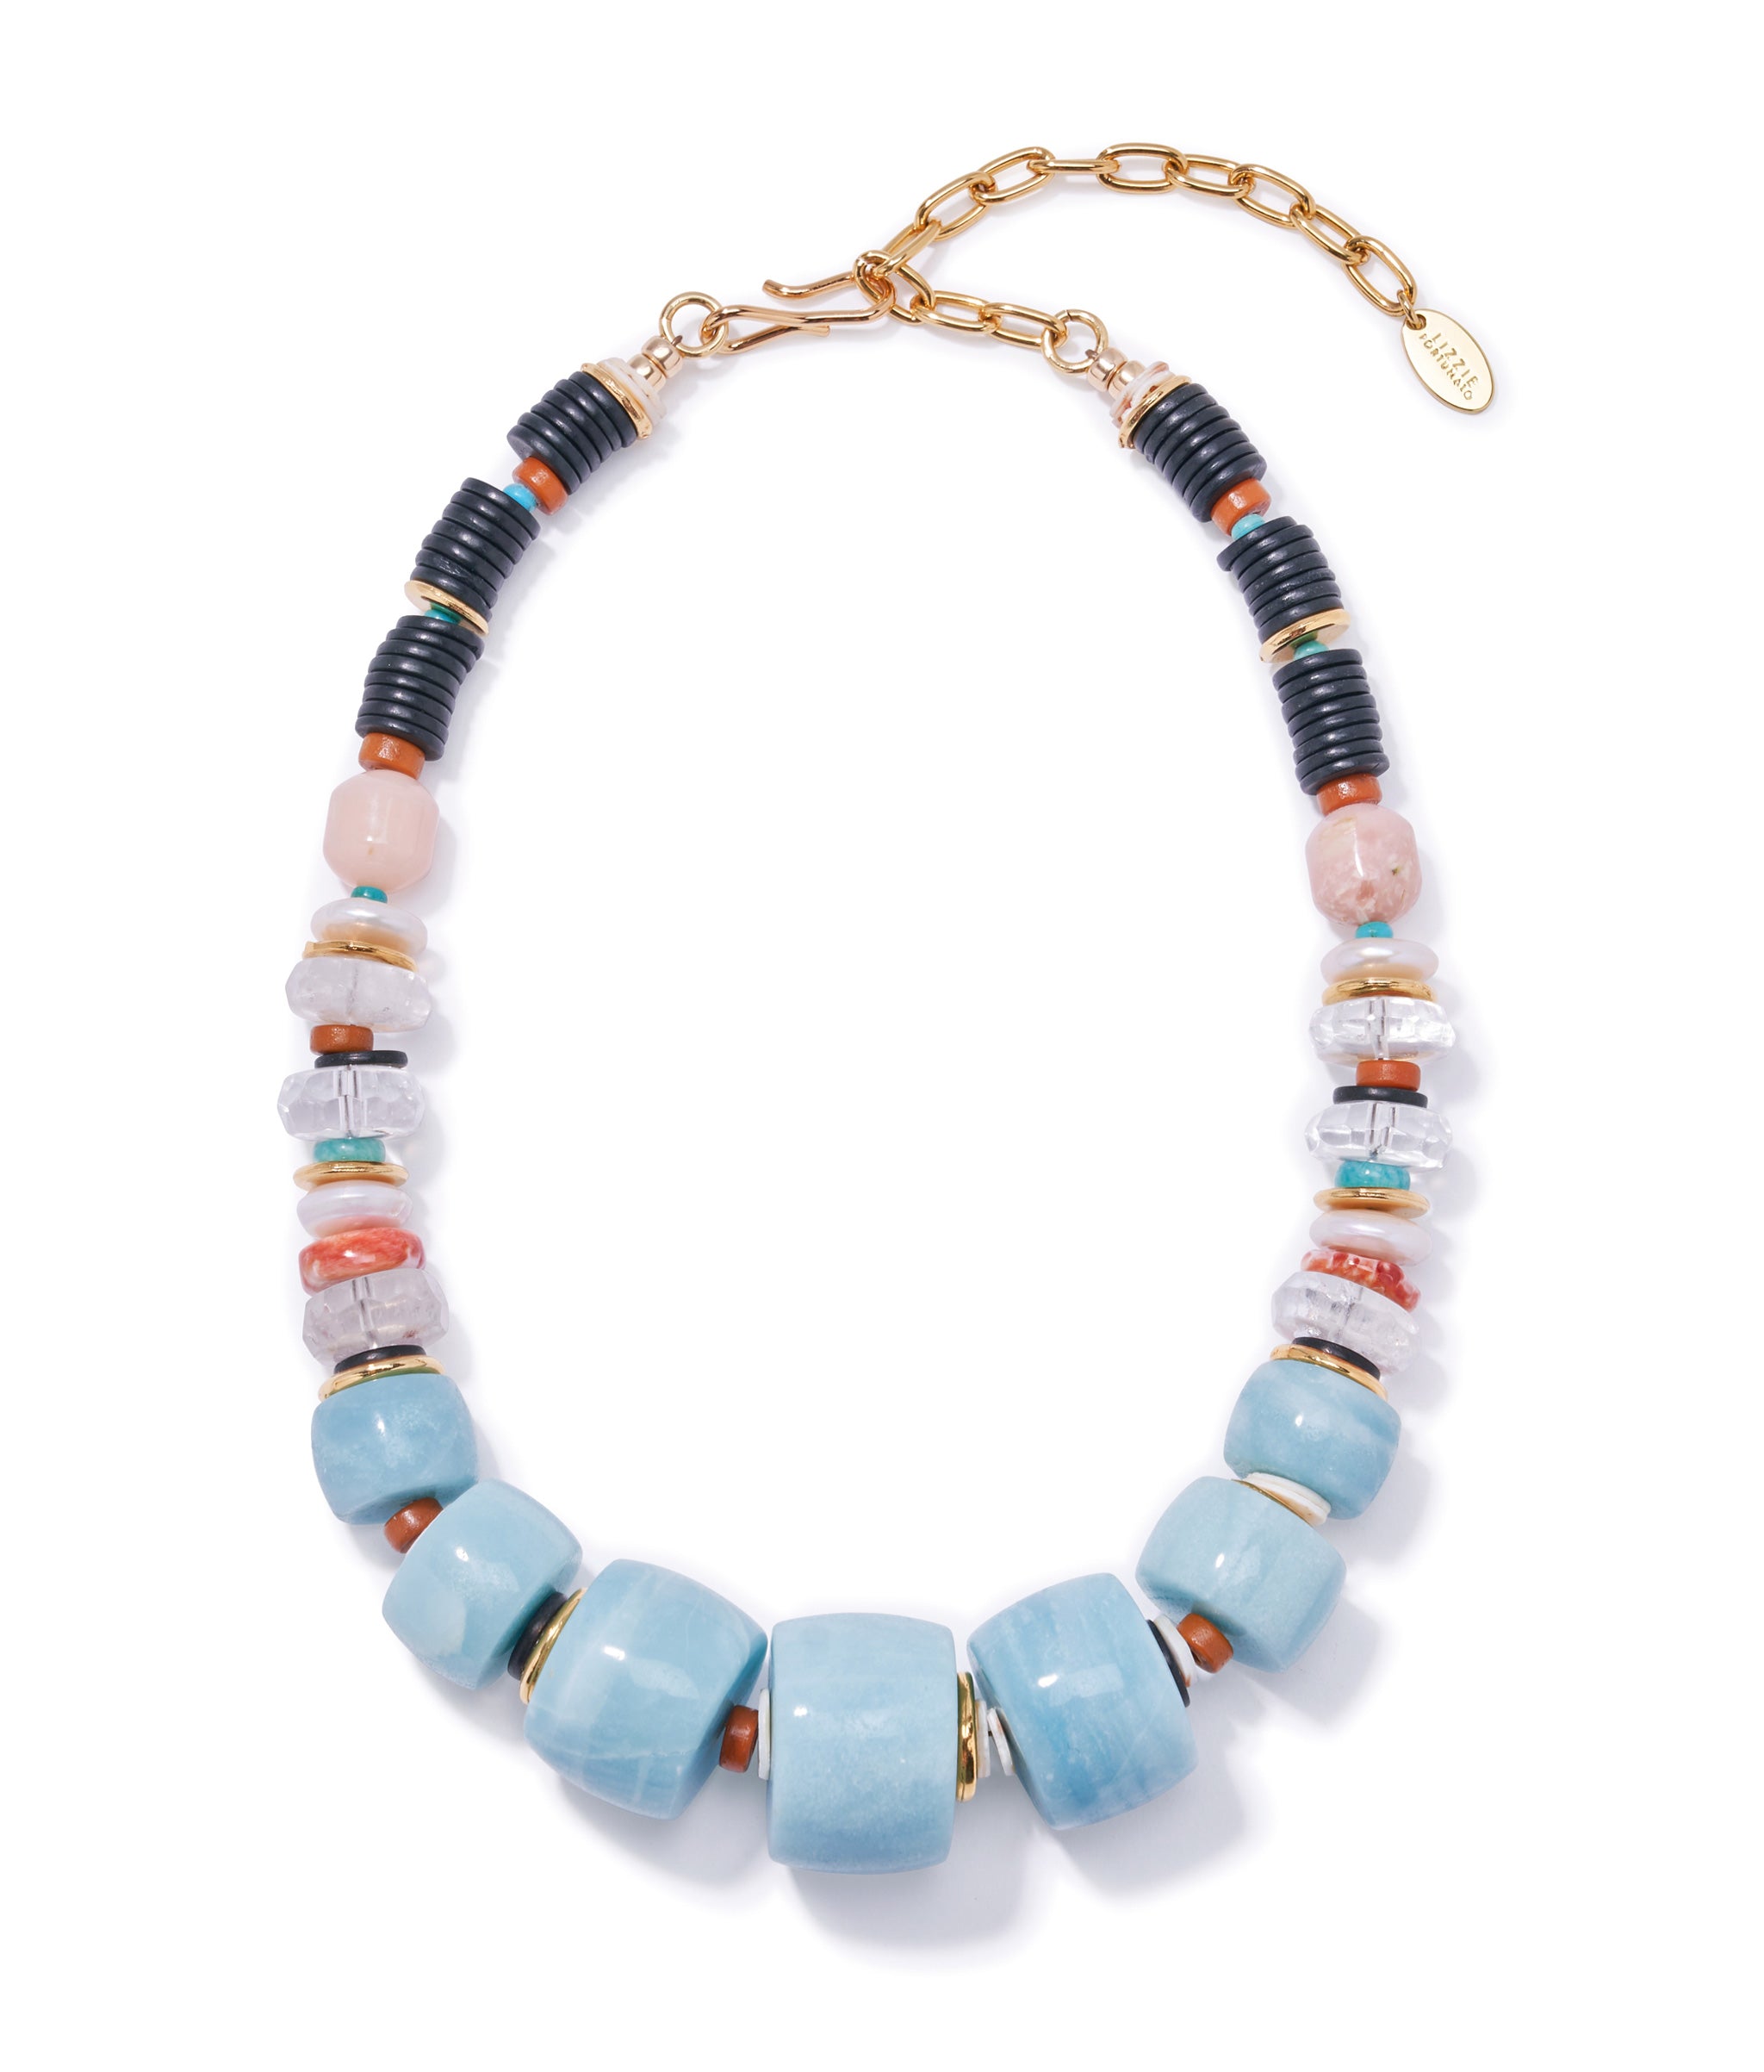 Regal Garden Necklace. Chunky graduated beads in shell, glass, pink opal, pearl + turquoise with amazonite focal beads